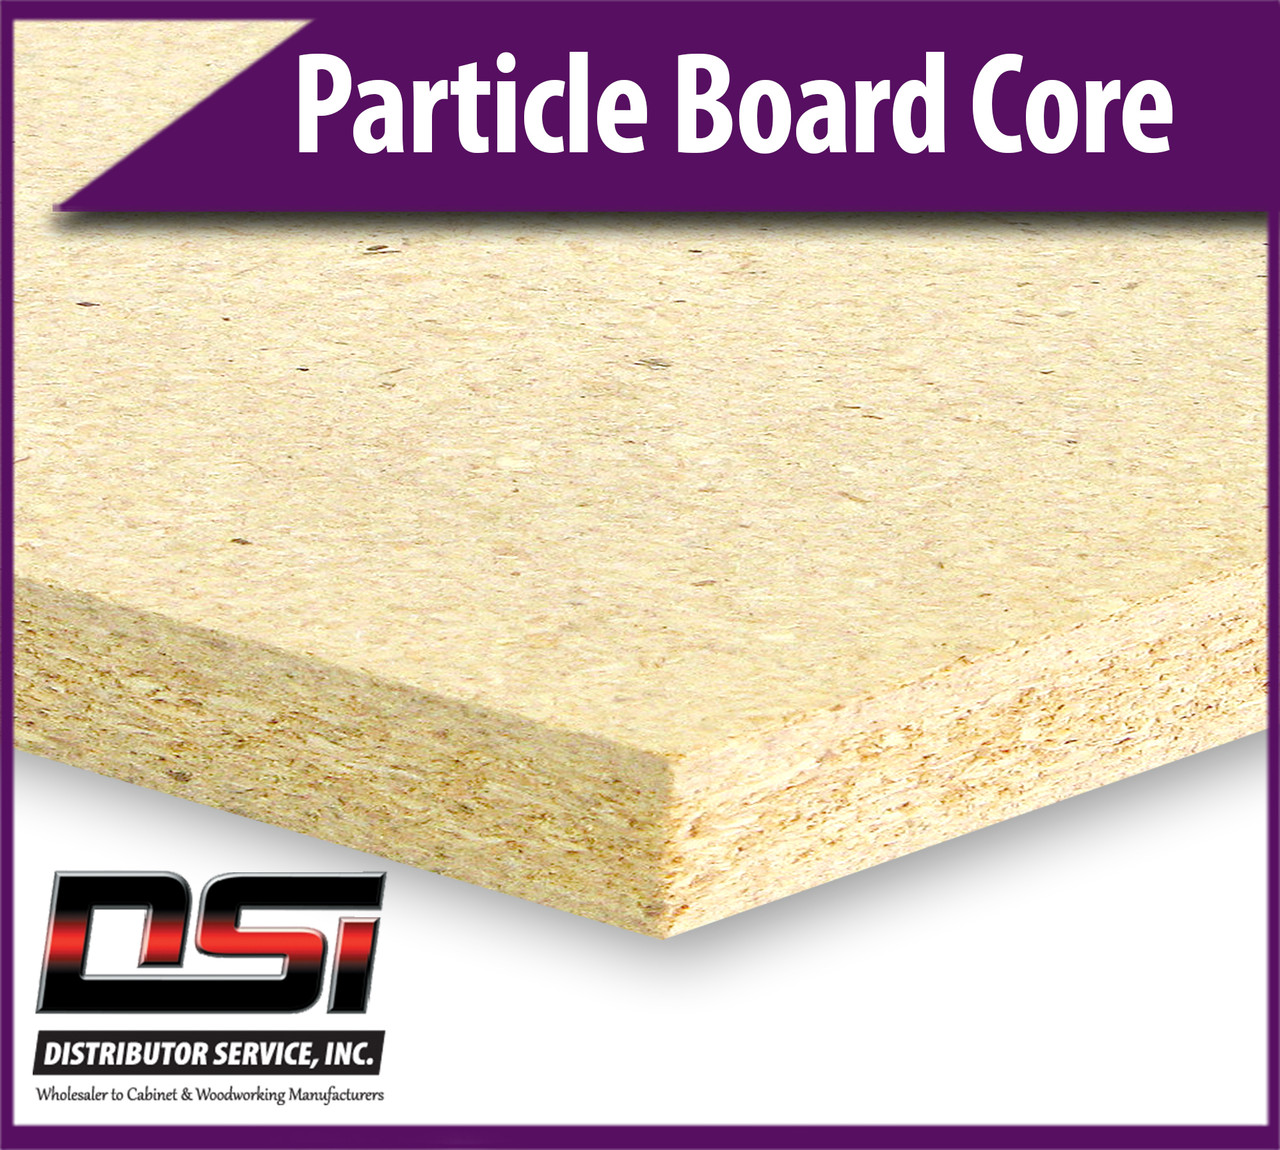 Particle Board Core 1-1/8" x 61" x 121" Industrial Particleboard Panels